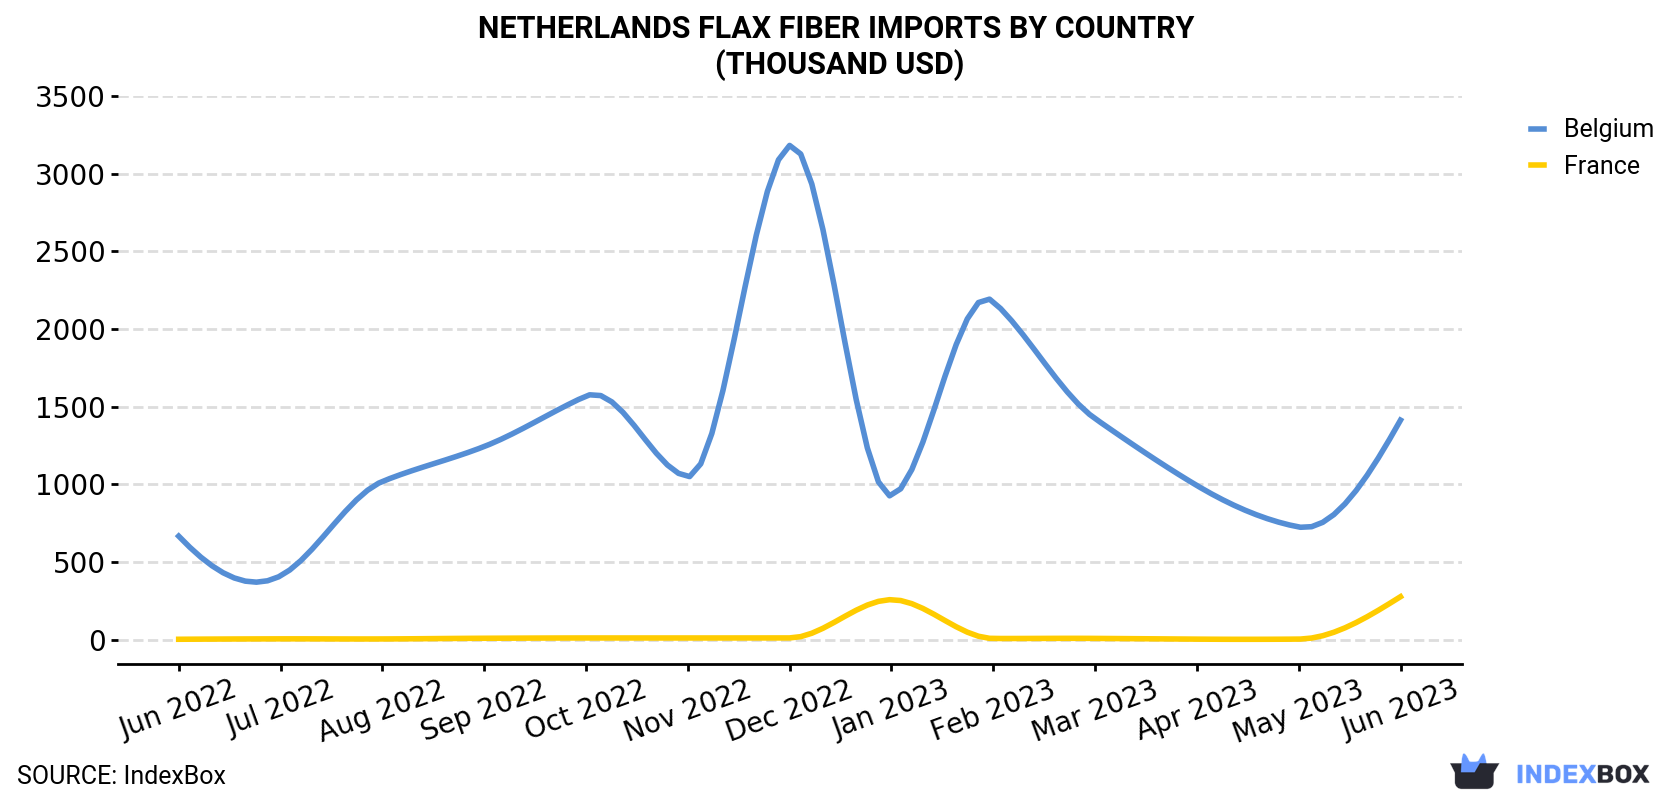 Netherlands Flax Fiber Imports By Country (Thousand USD)